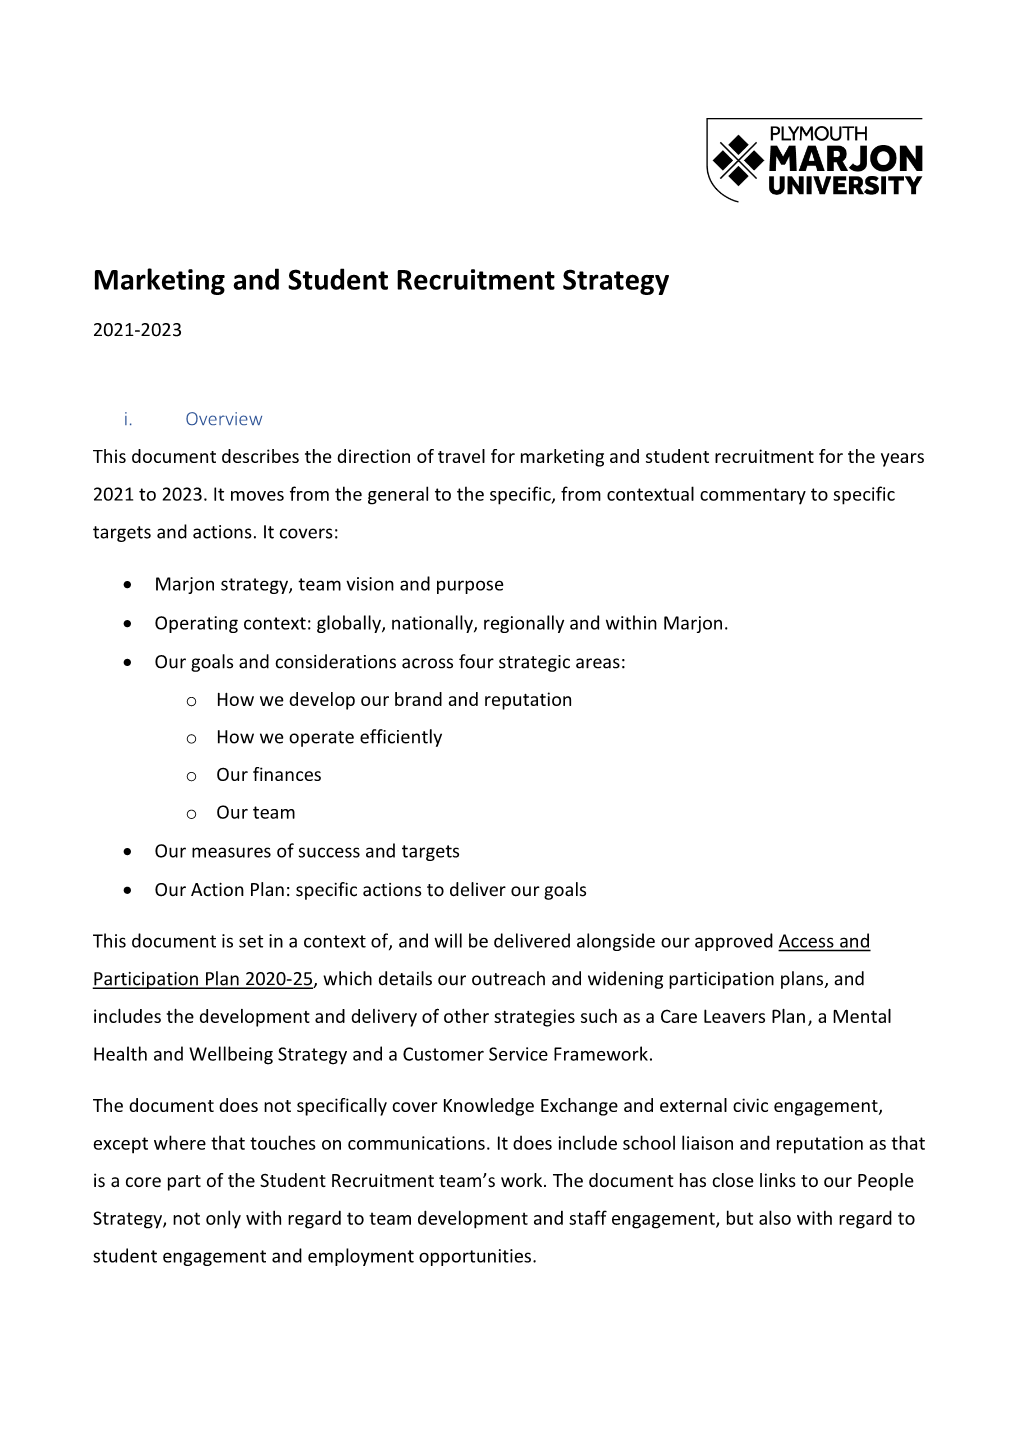 Marketing and Student Recruitment Strategy